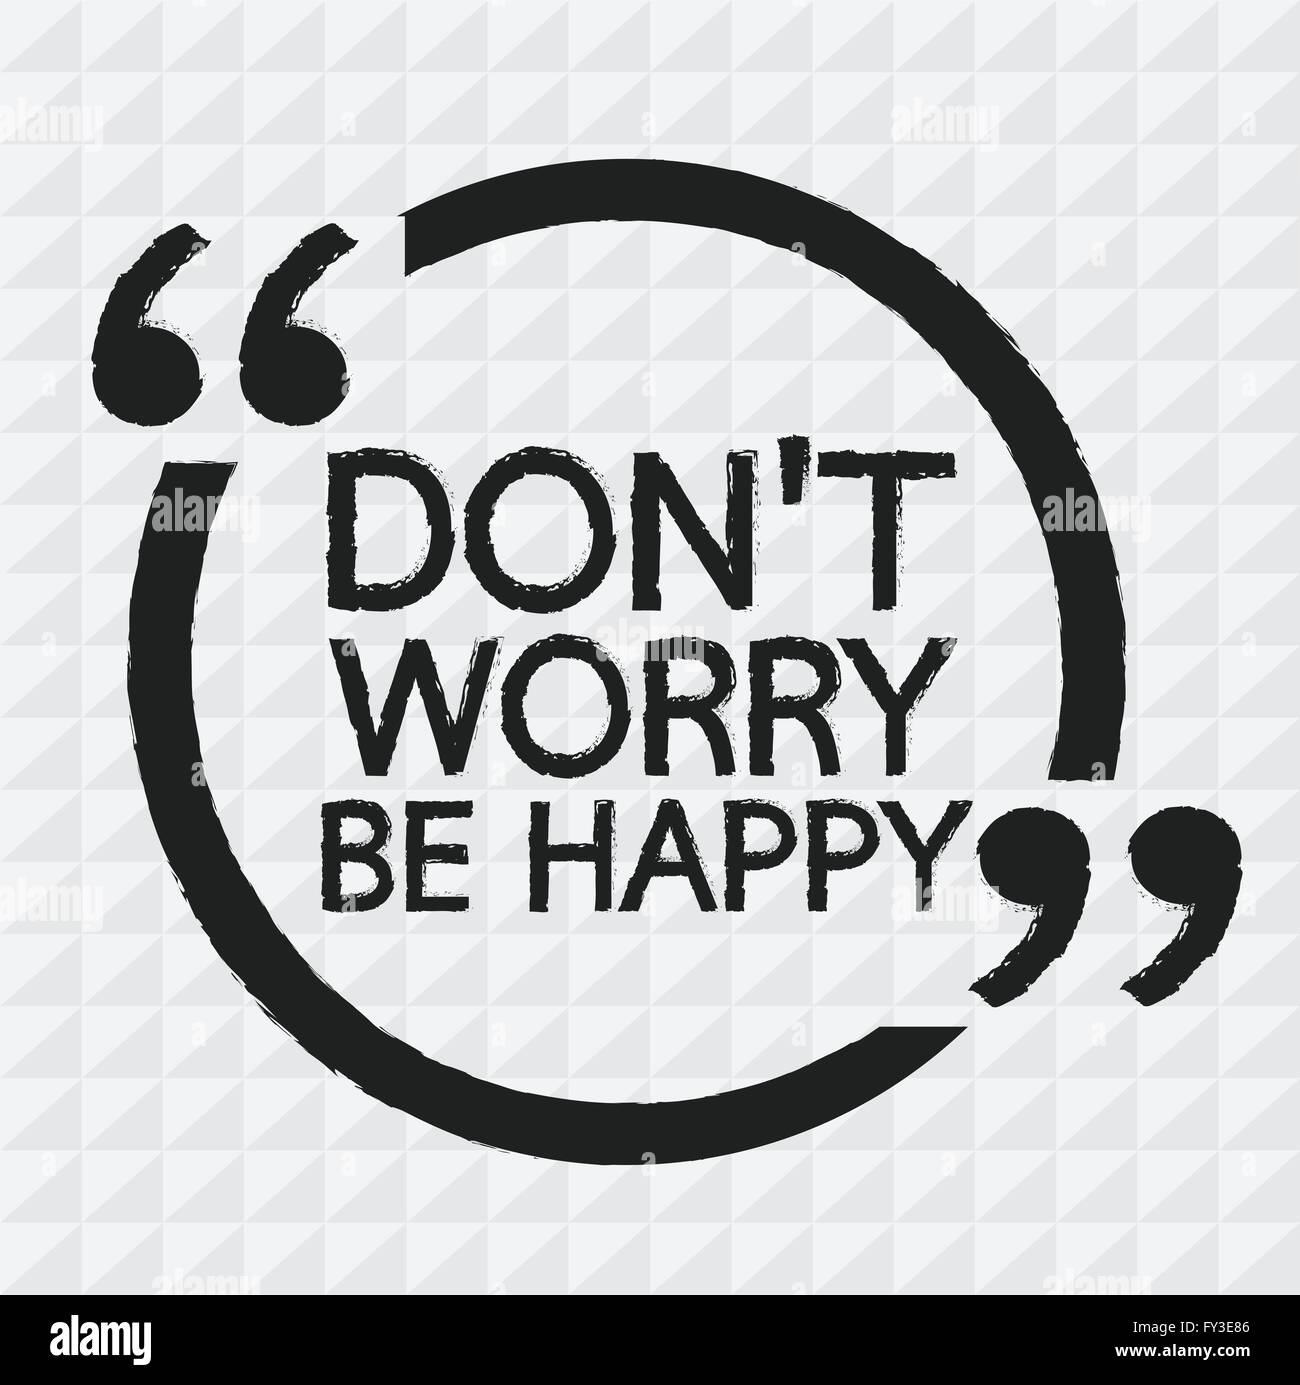 Don t worry dont. Надпись don't worry be Happy. Don't worry be Happy леттеринг. Dont worry by Happy исполнитель. Dont worry by Happy надпись.